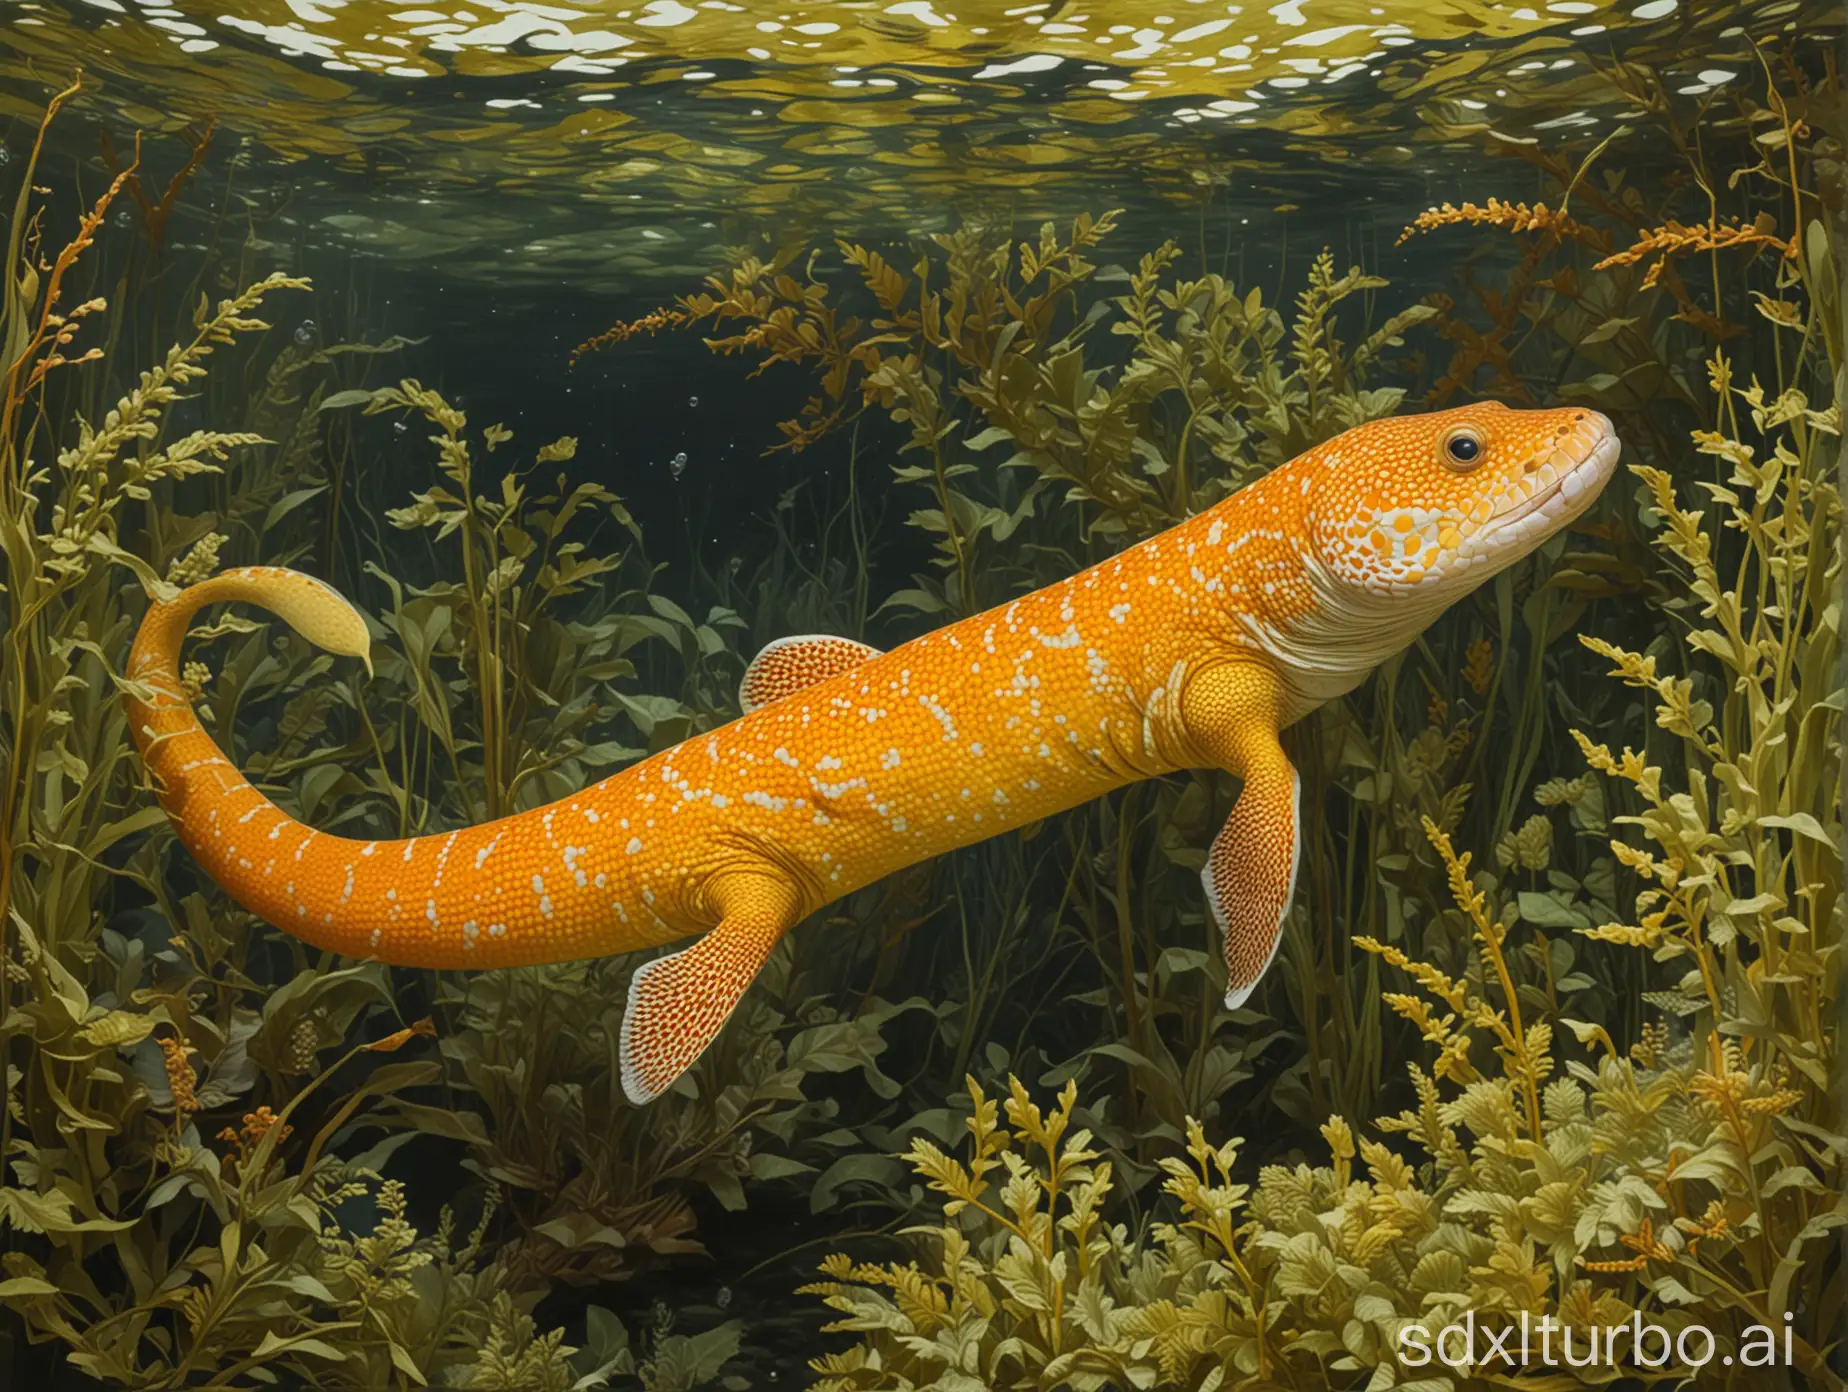 A full body shot of swimming spotted chromatic orange-yellow Moray, view from inside a river full of aquatic plants, in the style of a painting by Leyendecker